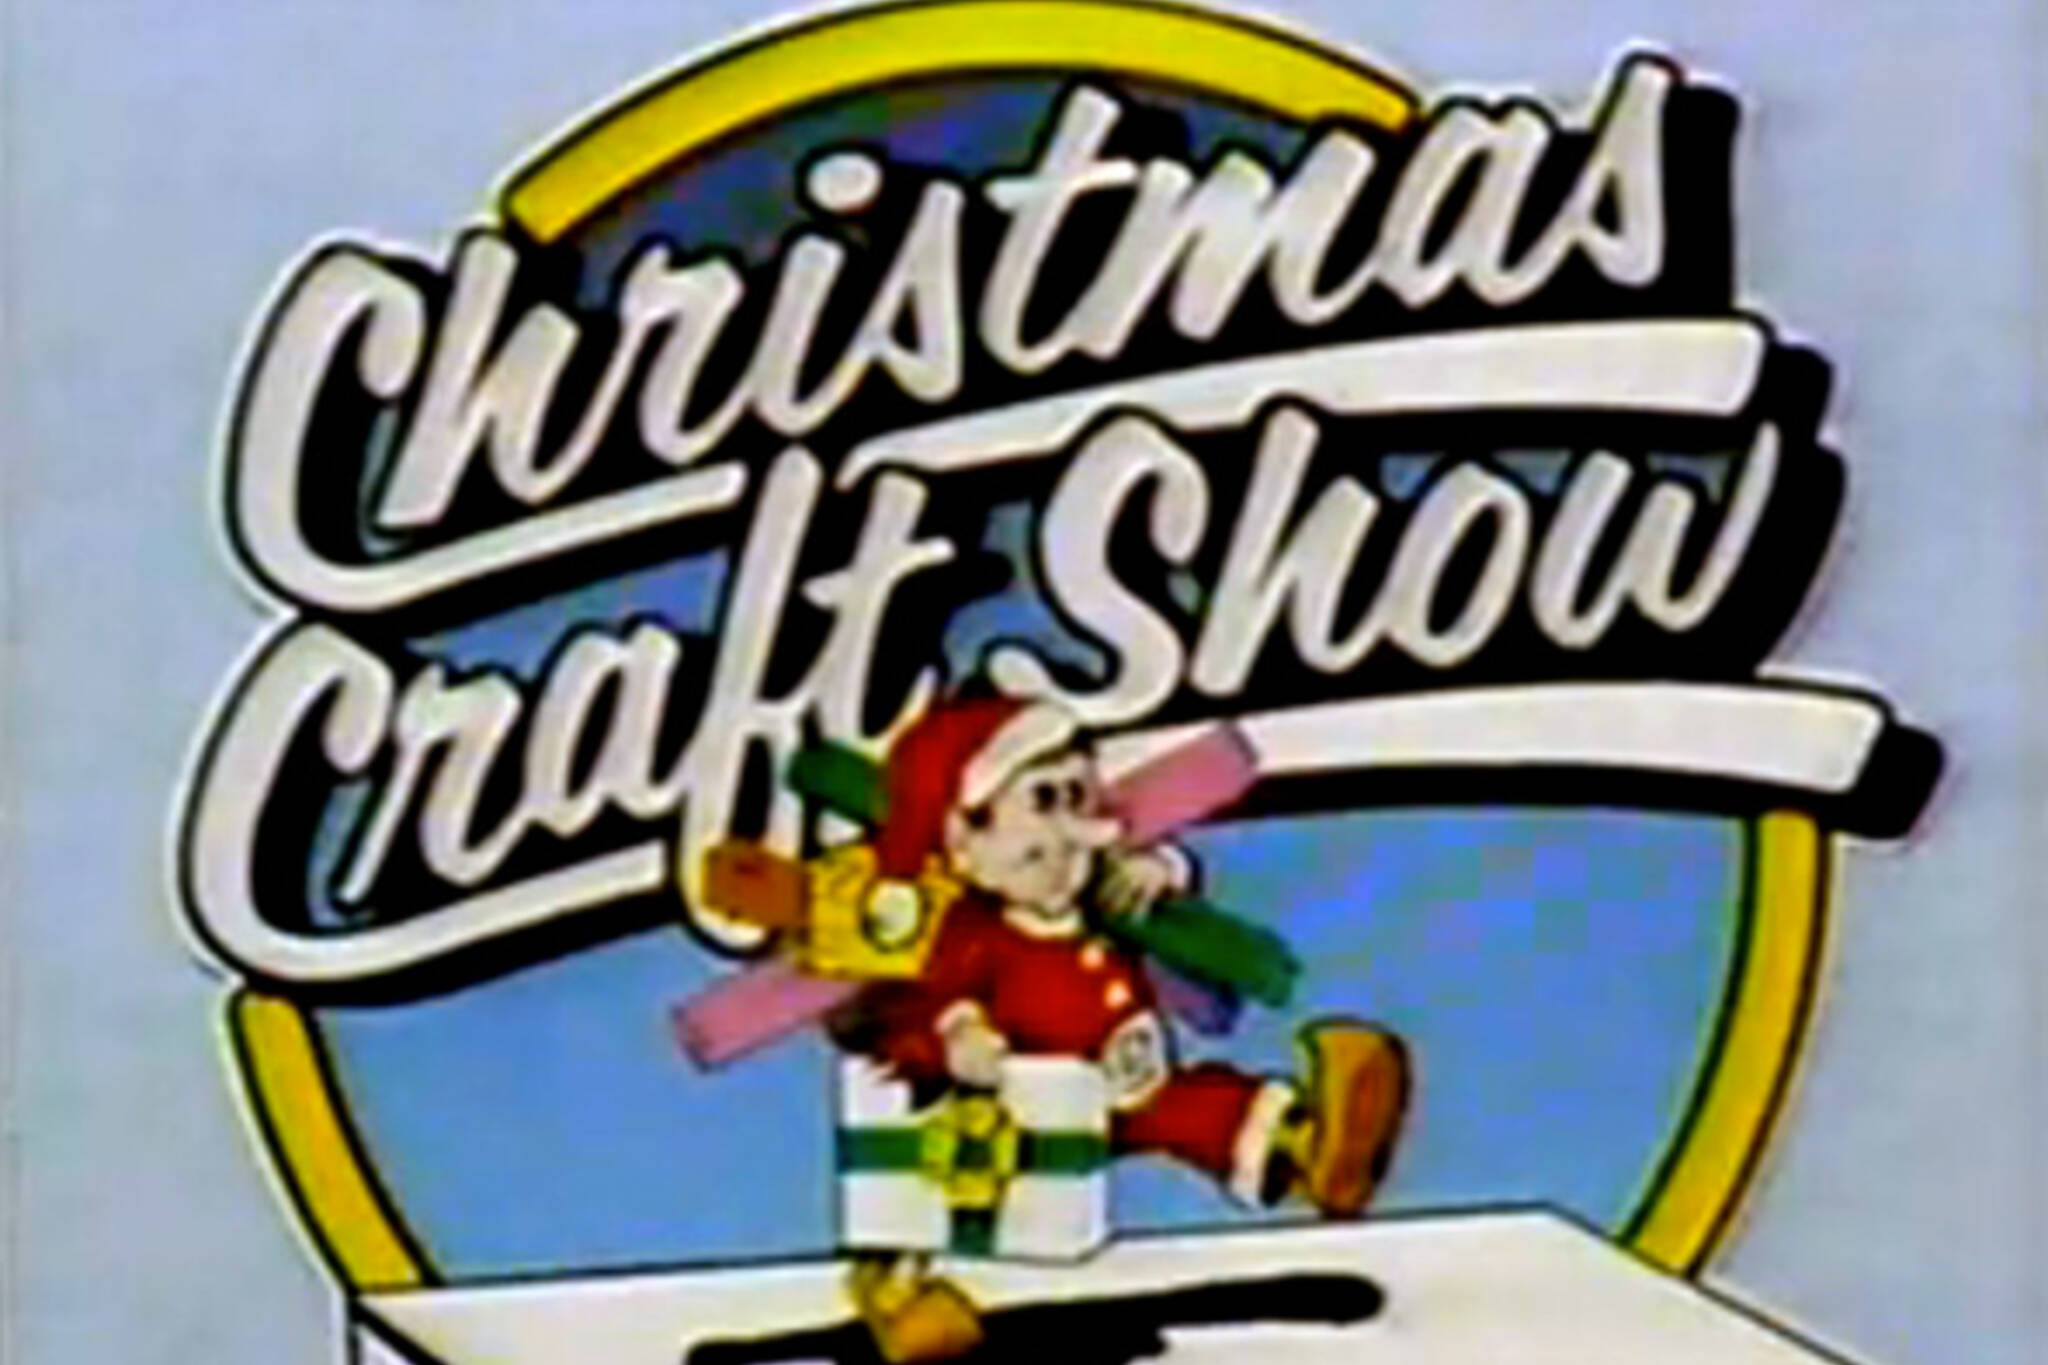 Vintage Toronto holiday Commercials